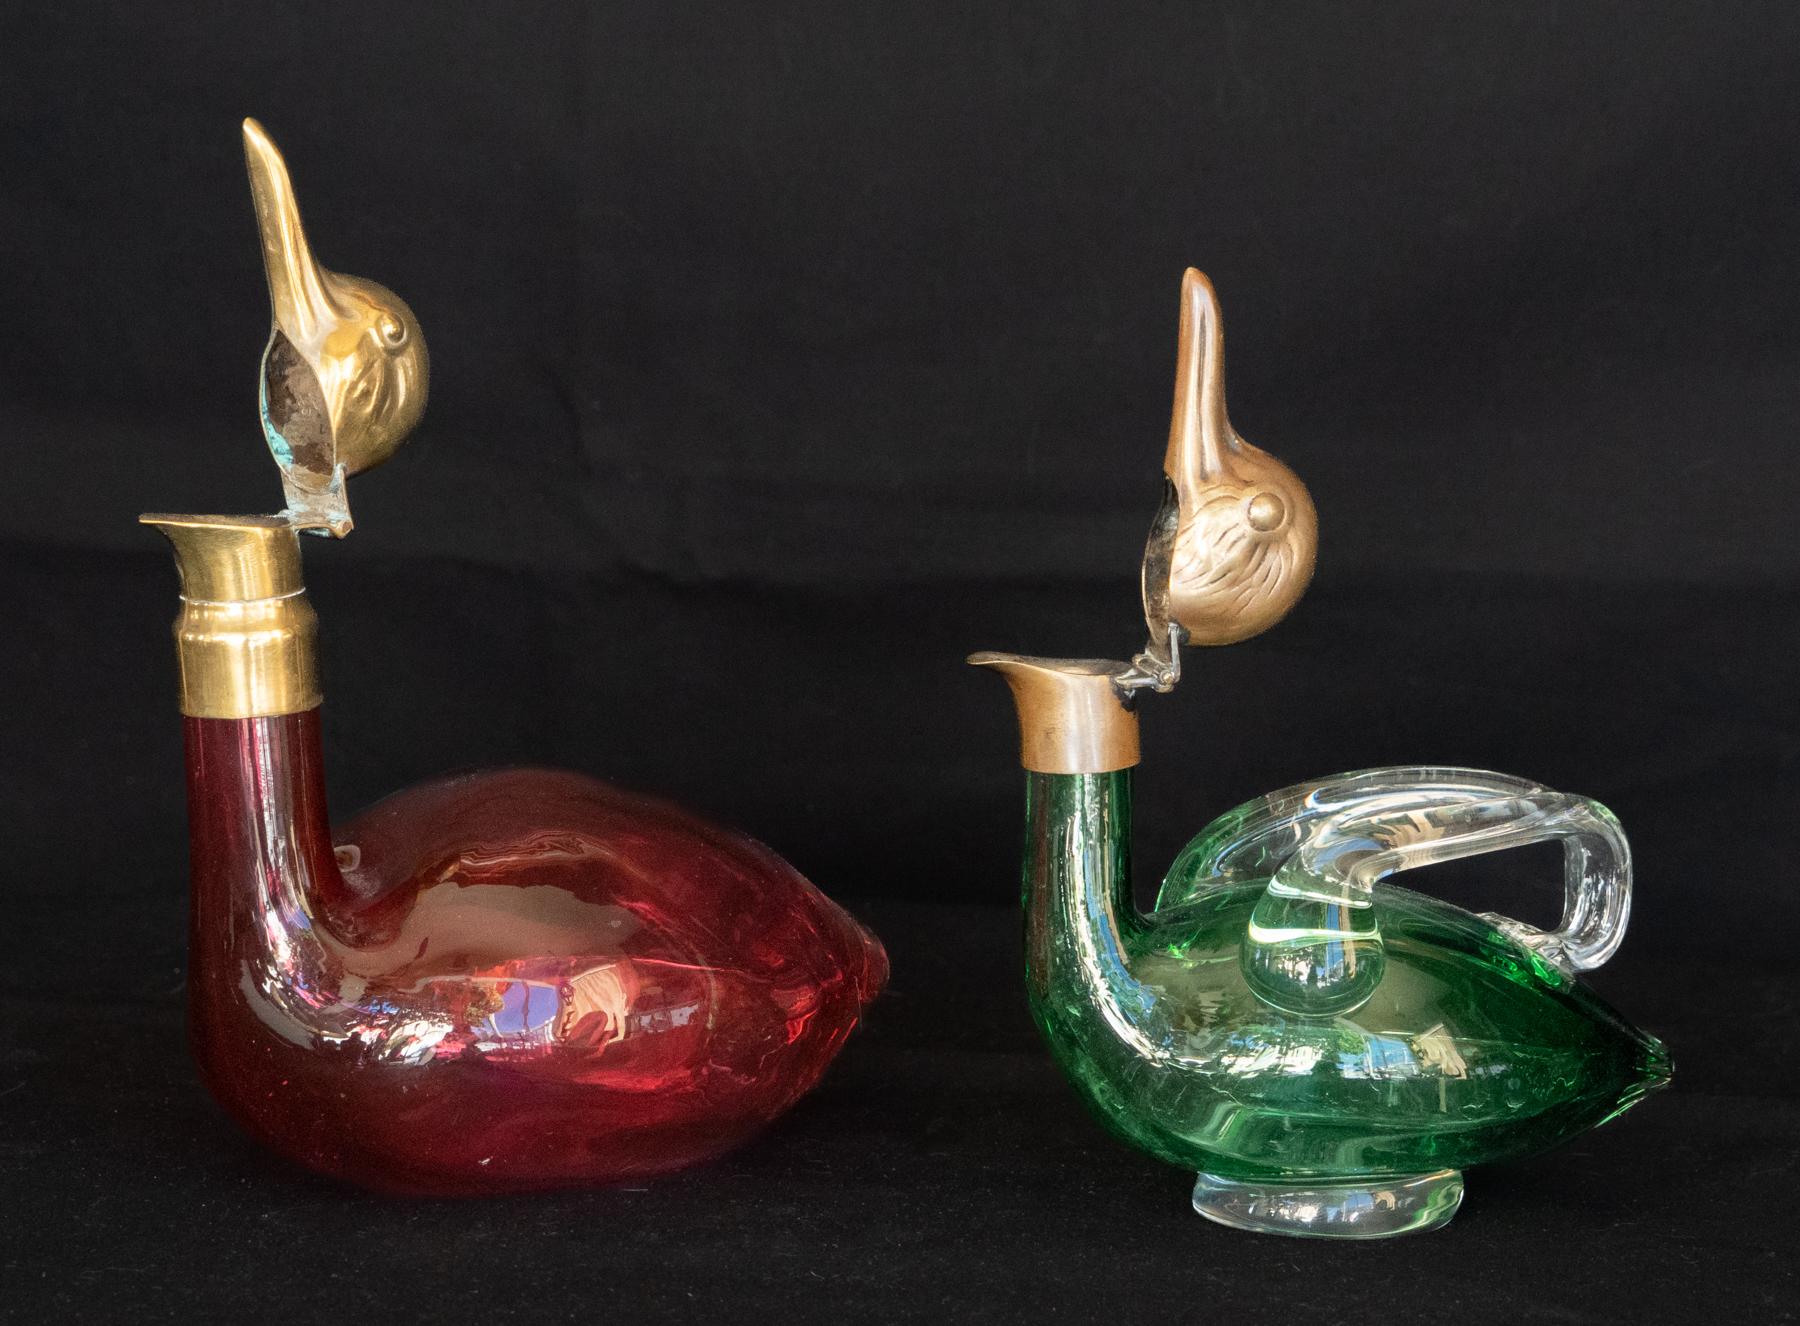 Two early 20th century Austrian decanters in the form of ducks, circa 1920
Two decanters (large/small), smaller with handle and larger without. Good clear colors. The brass heads, once silvered, with beaks that open for a pour.
Perfect for Port